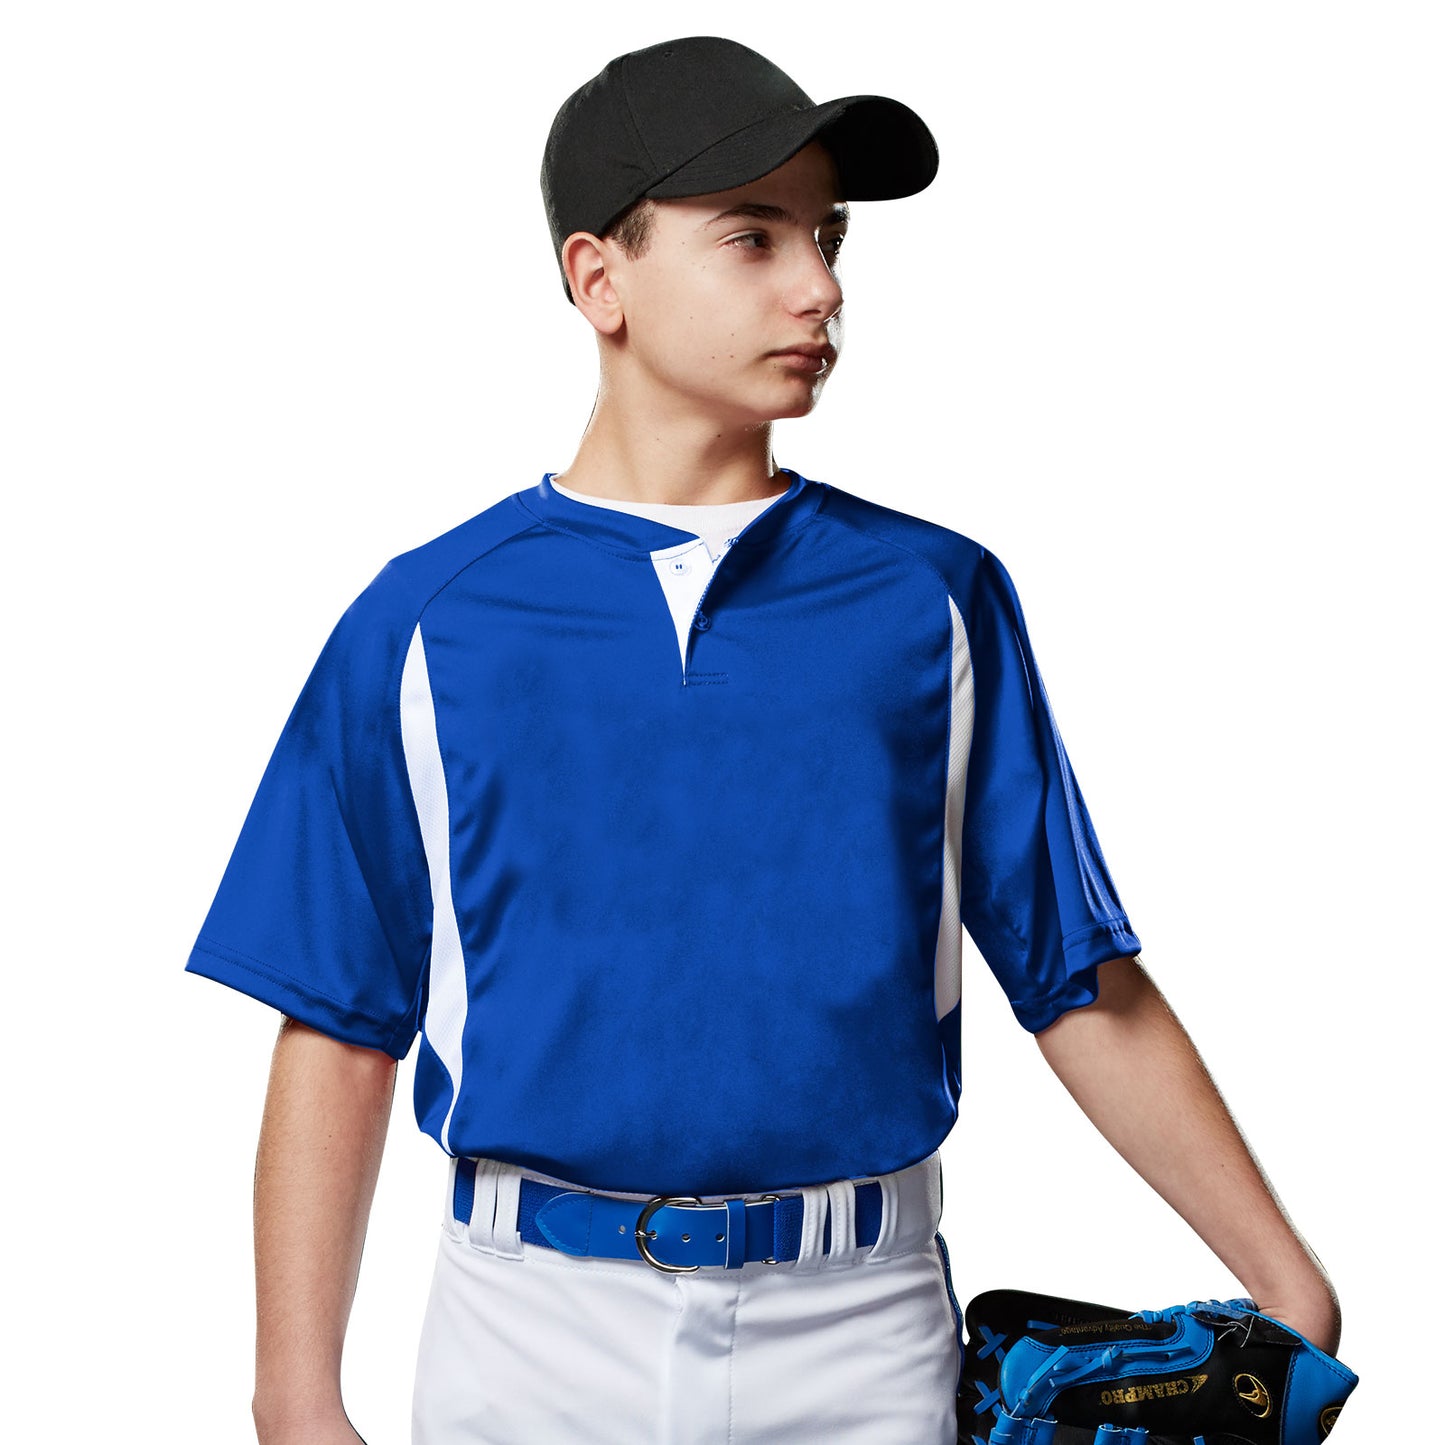 Wild Card 2 Button 2 Color Baseball Jersey, Adult